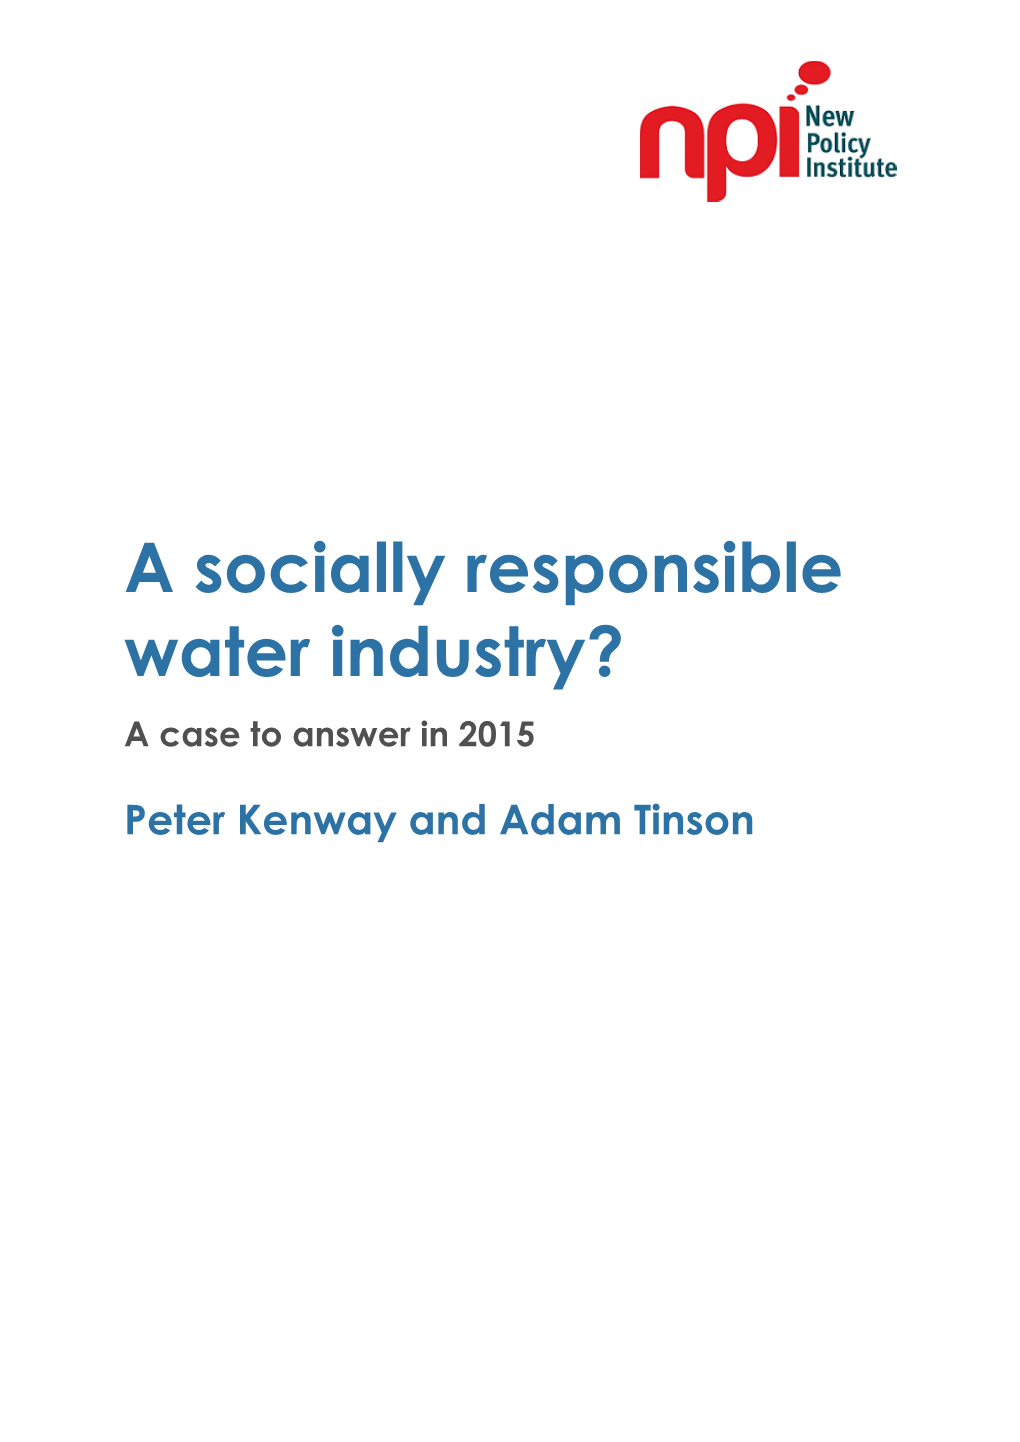 A Socially Responsible Water Industry? a Case to Answer in 2015